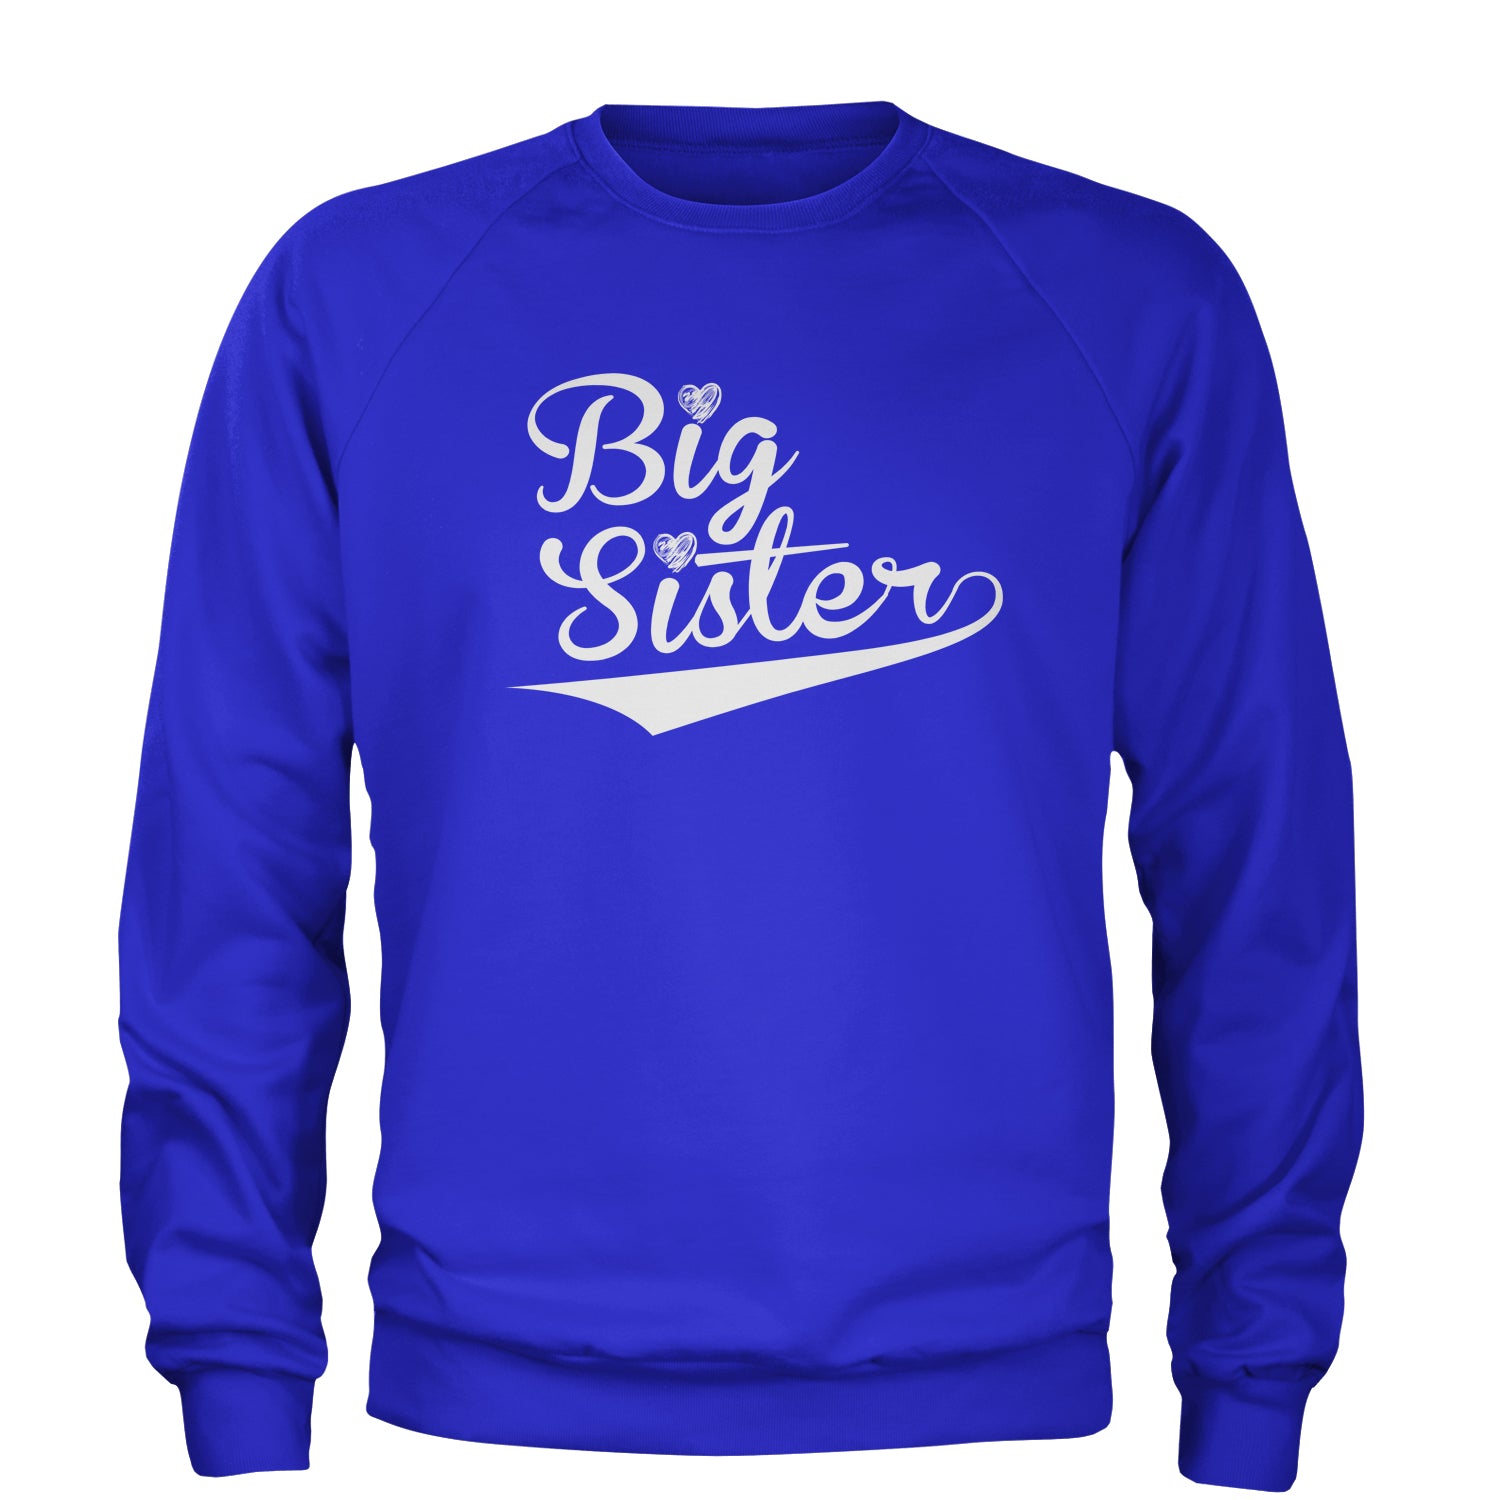 Big Sister Sibling Adult Crewneck Sweatshirt announcement, big, brother, family, little, rivalry, sibling, sister by Expression Tees